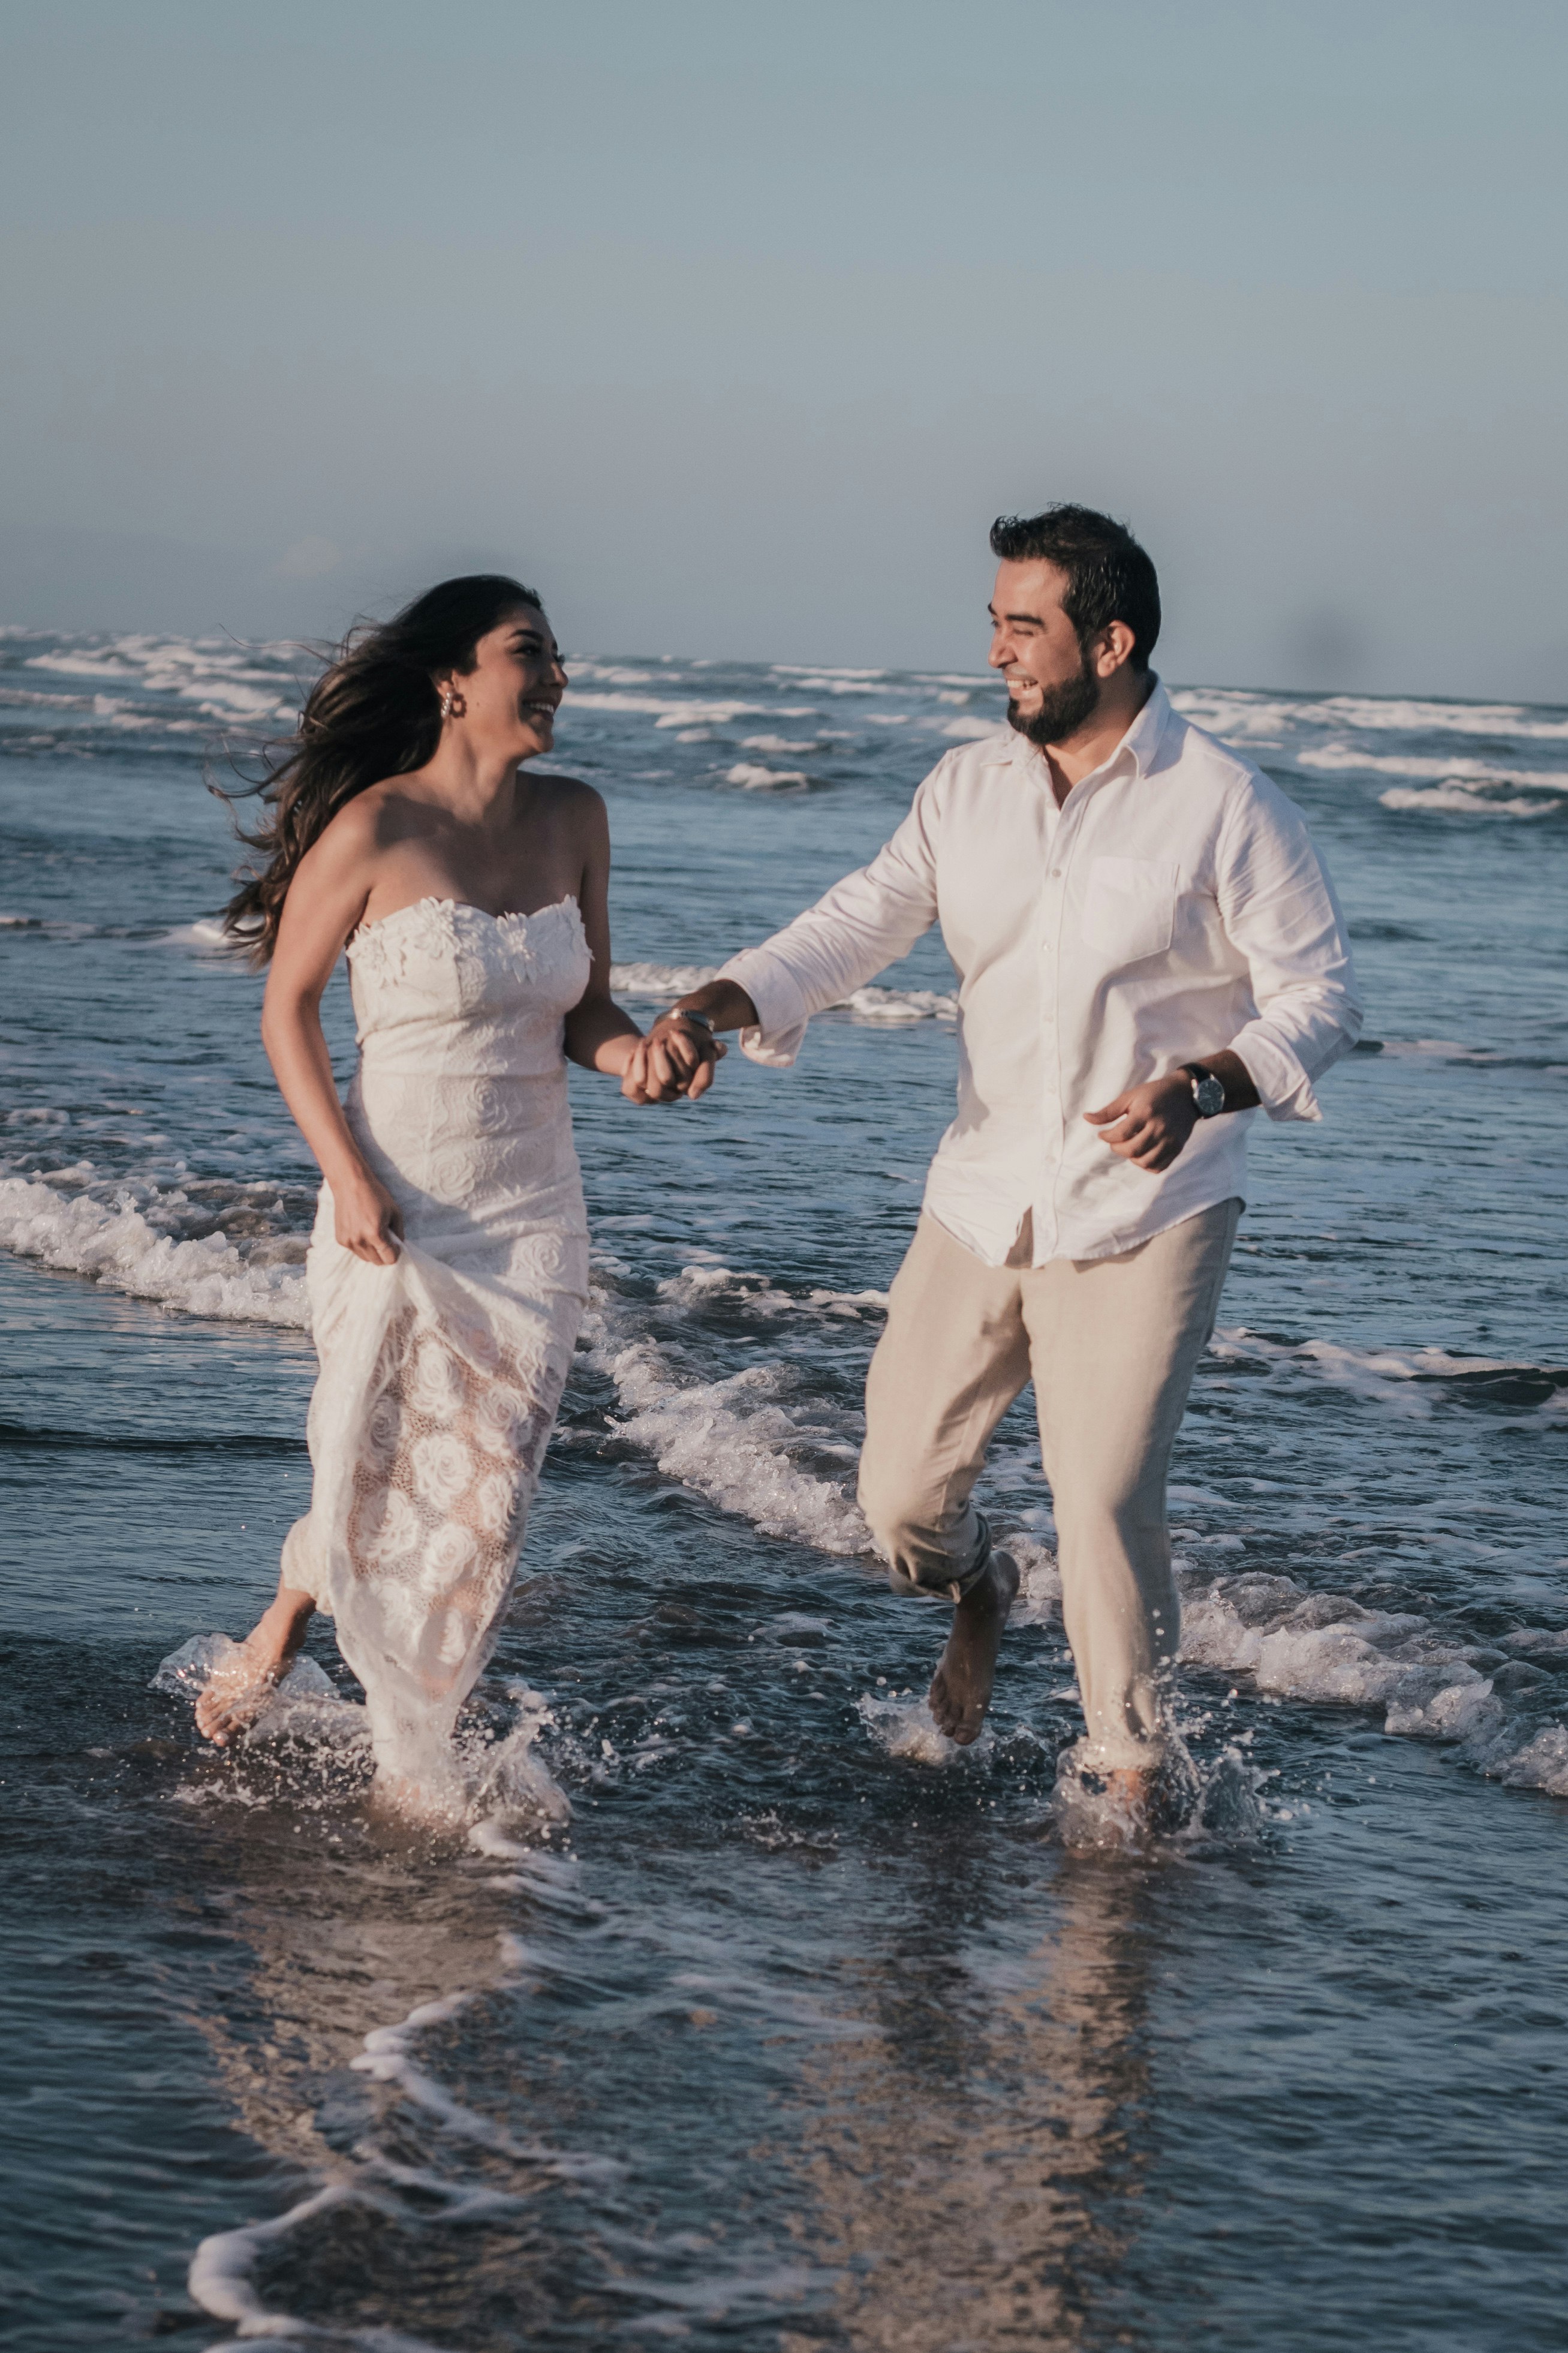 man and woman in white dress walking on sea shore during daytime